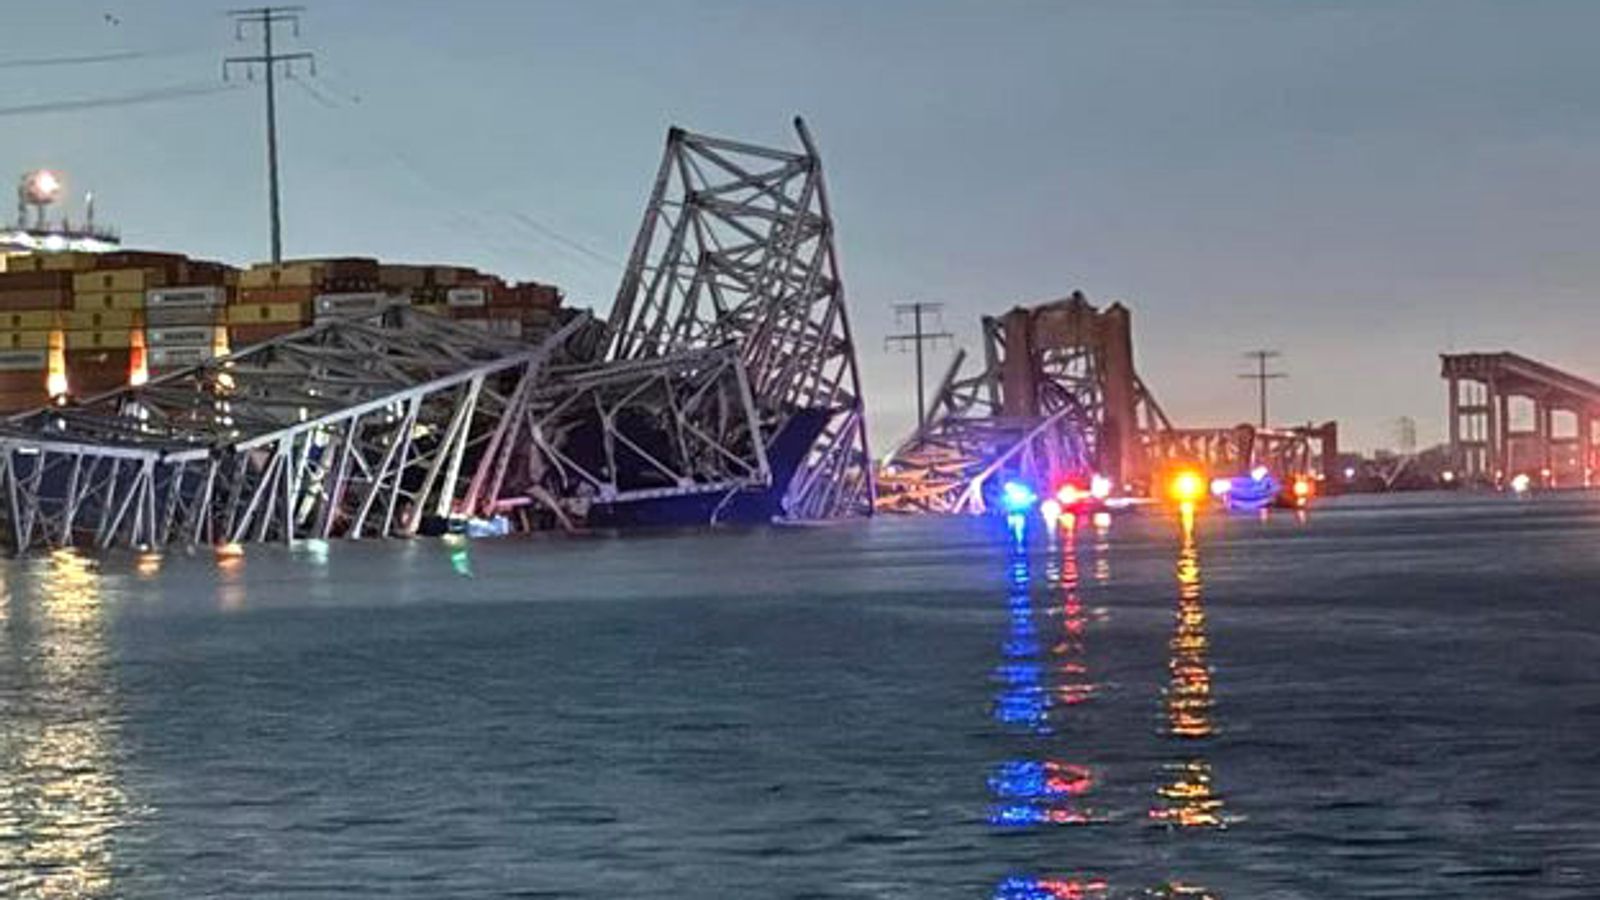 'dire emergency': people and vehicles fall into water as bridge collapses after being hit by ship